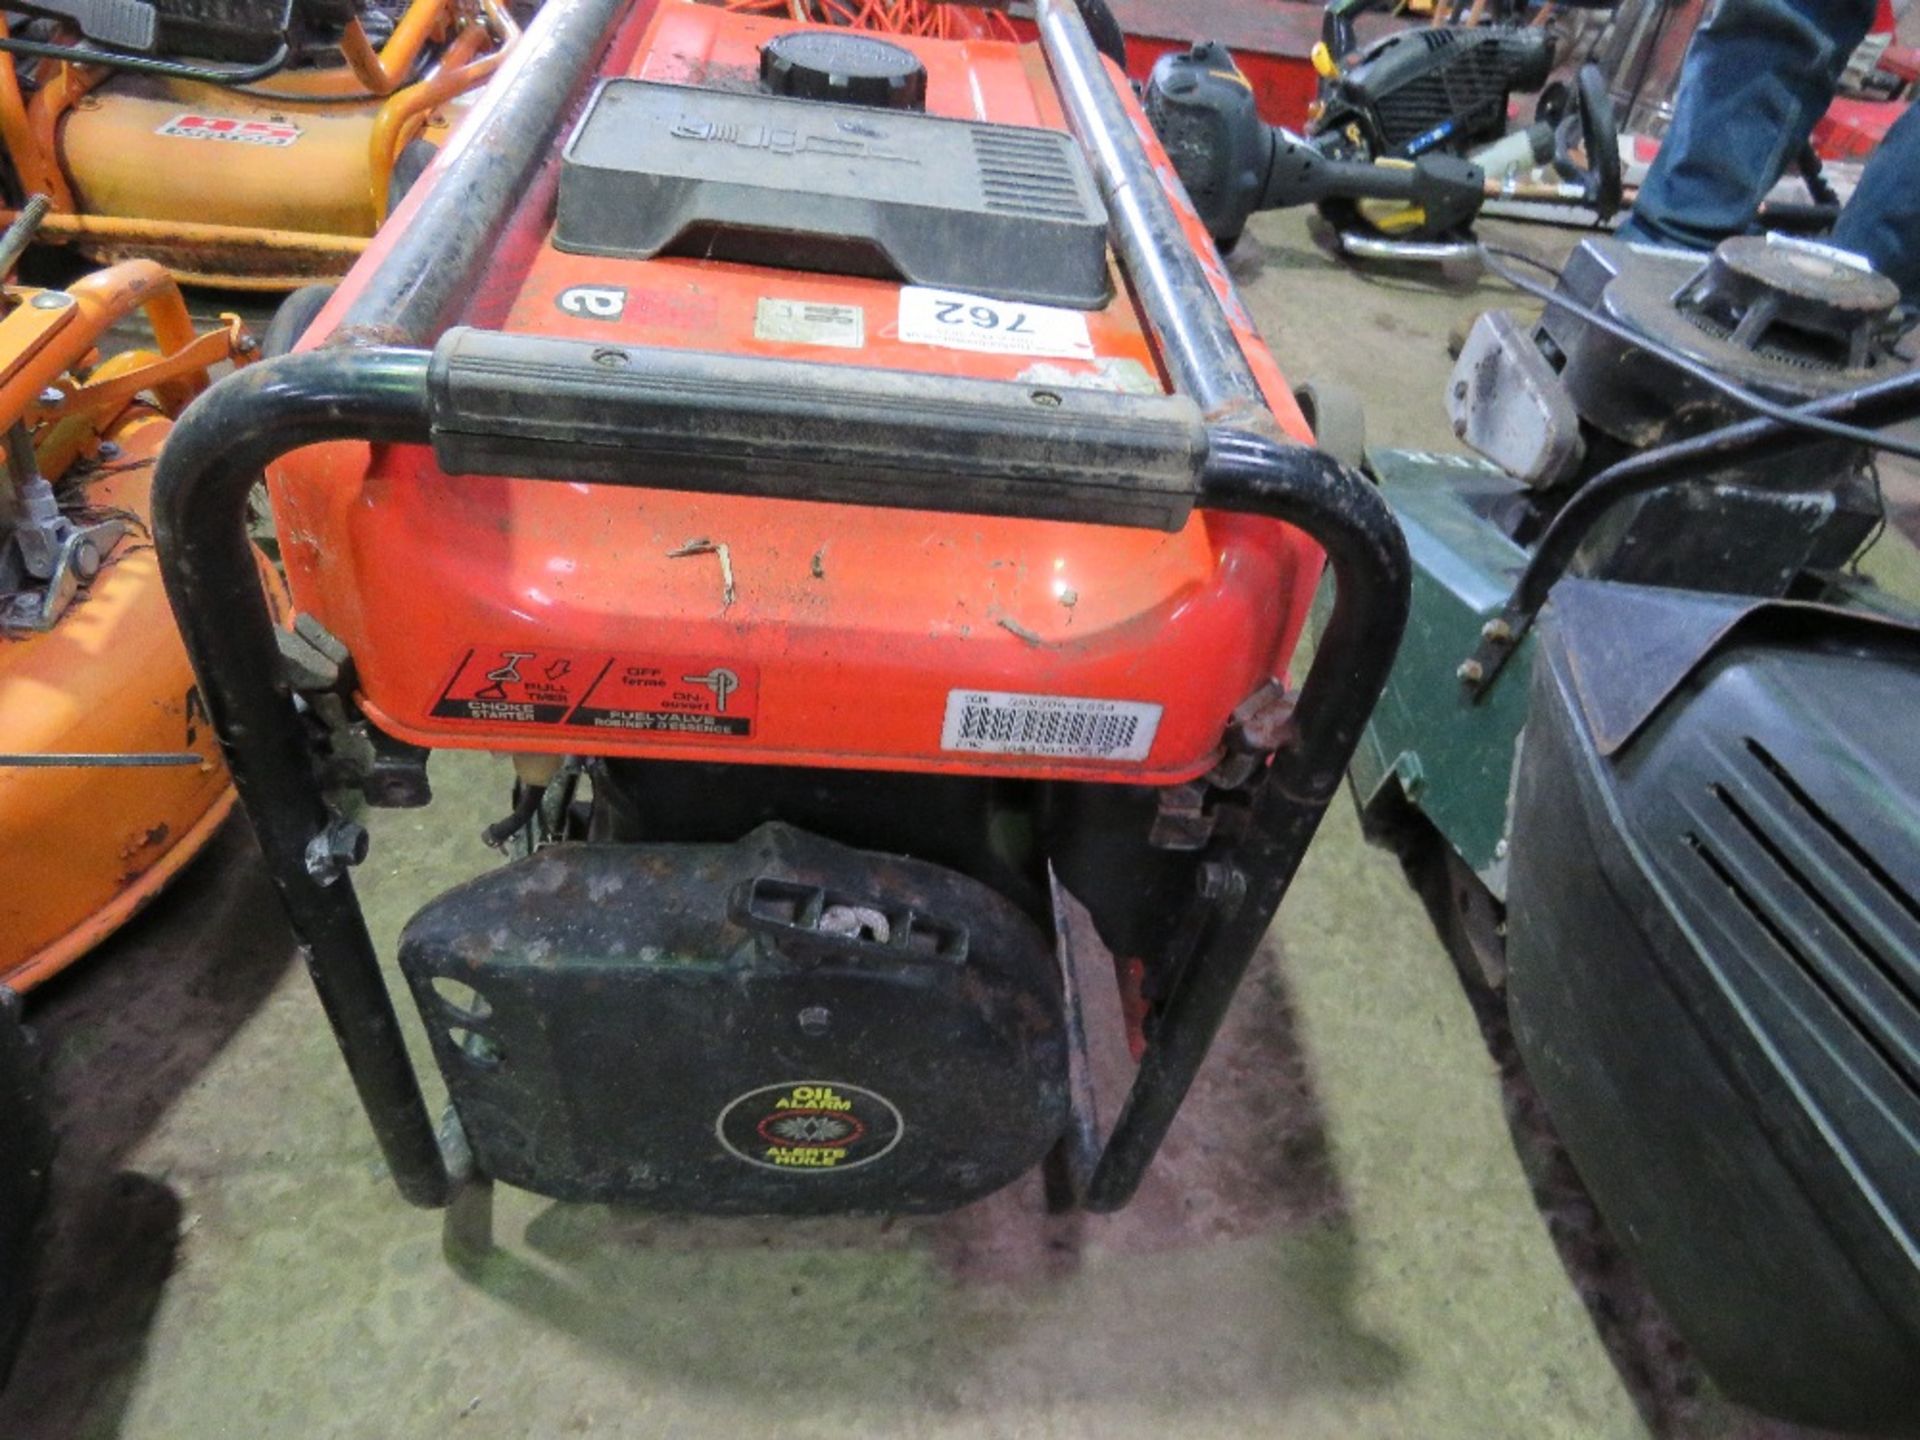 KAWASAKI GA2300A PETROL ENGINED GENERATOR. THIS LOT IS SOLD UNDER THE AUCTIONEERS MARGIN SCHEME, - Image 4 of 4